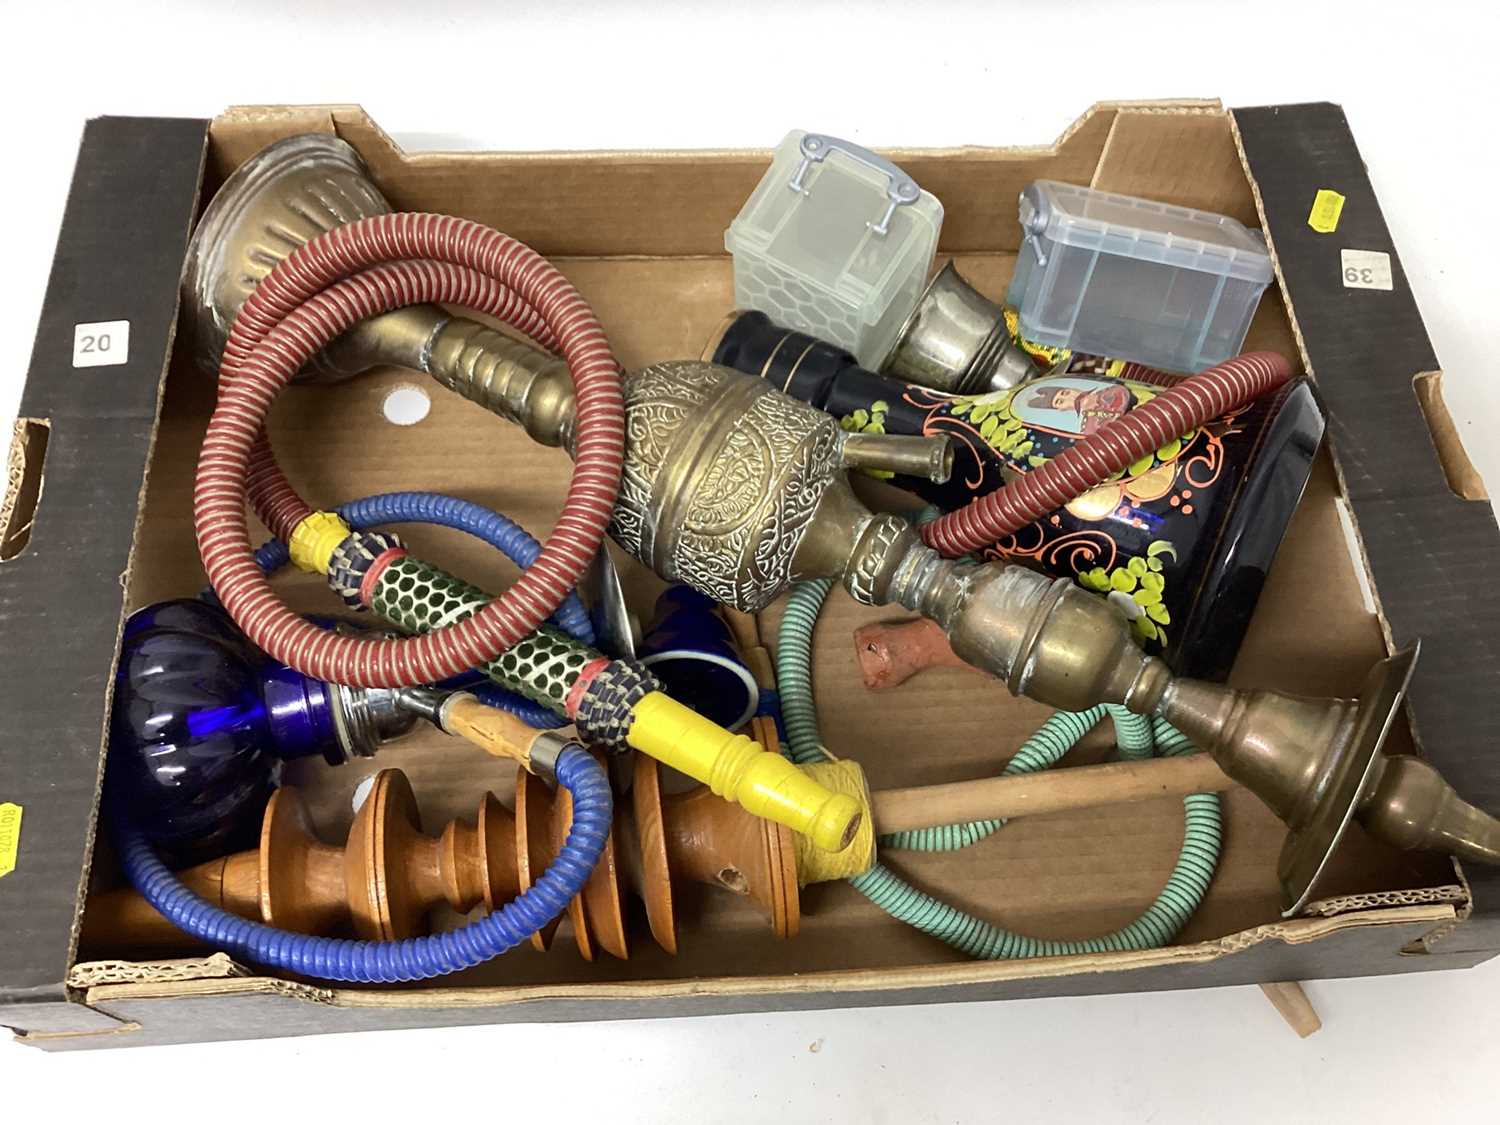 Two boxes of smoking pipes, including porcelain, wooden, and hookah